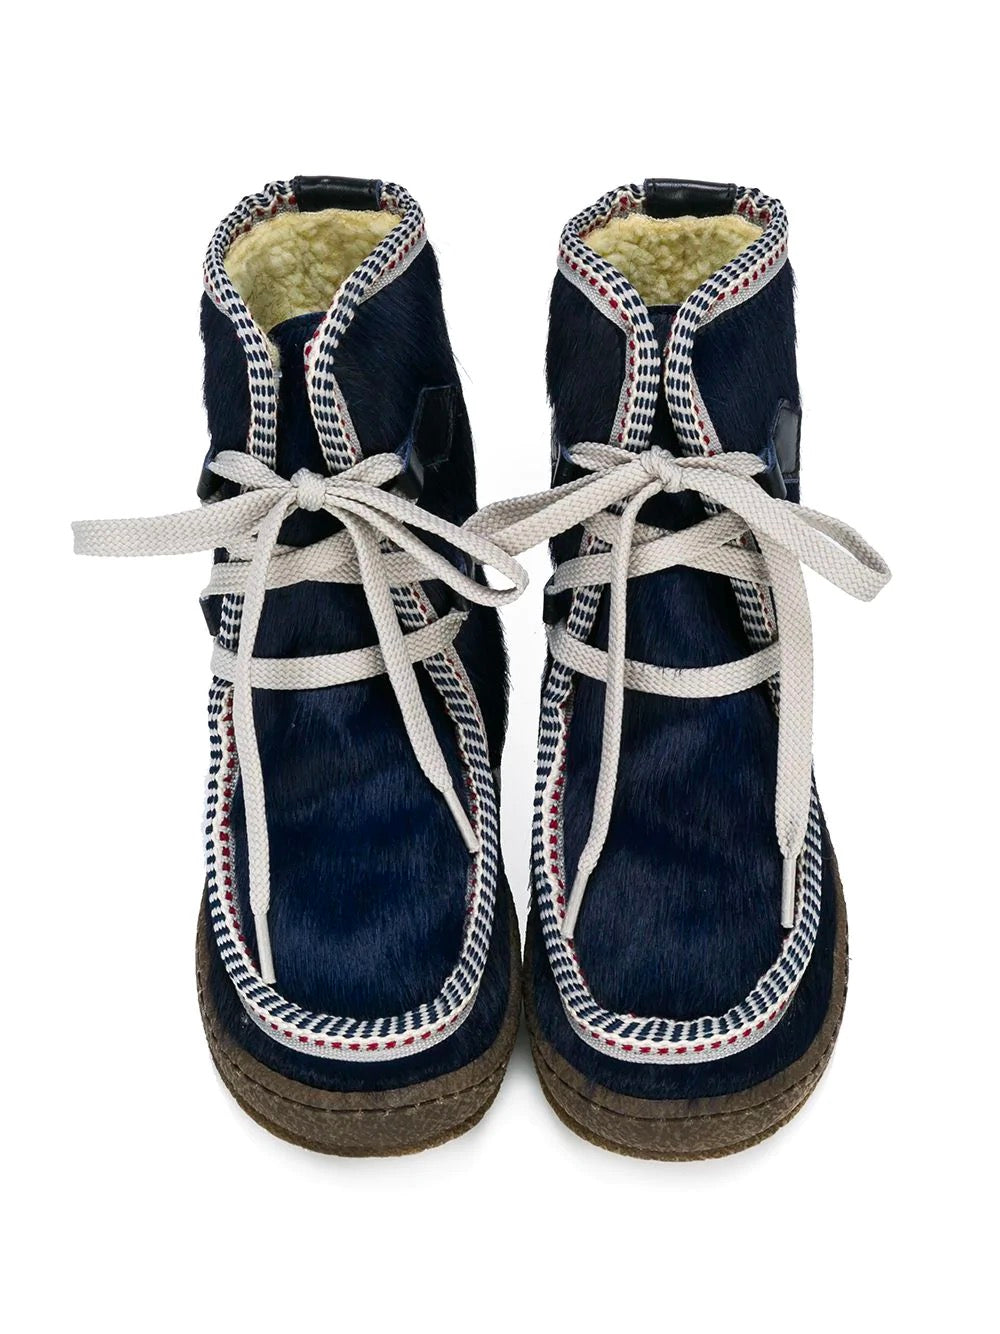 Boys & Girls Blue Leather Boots